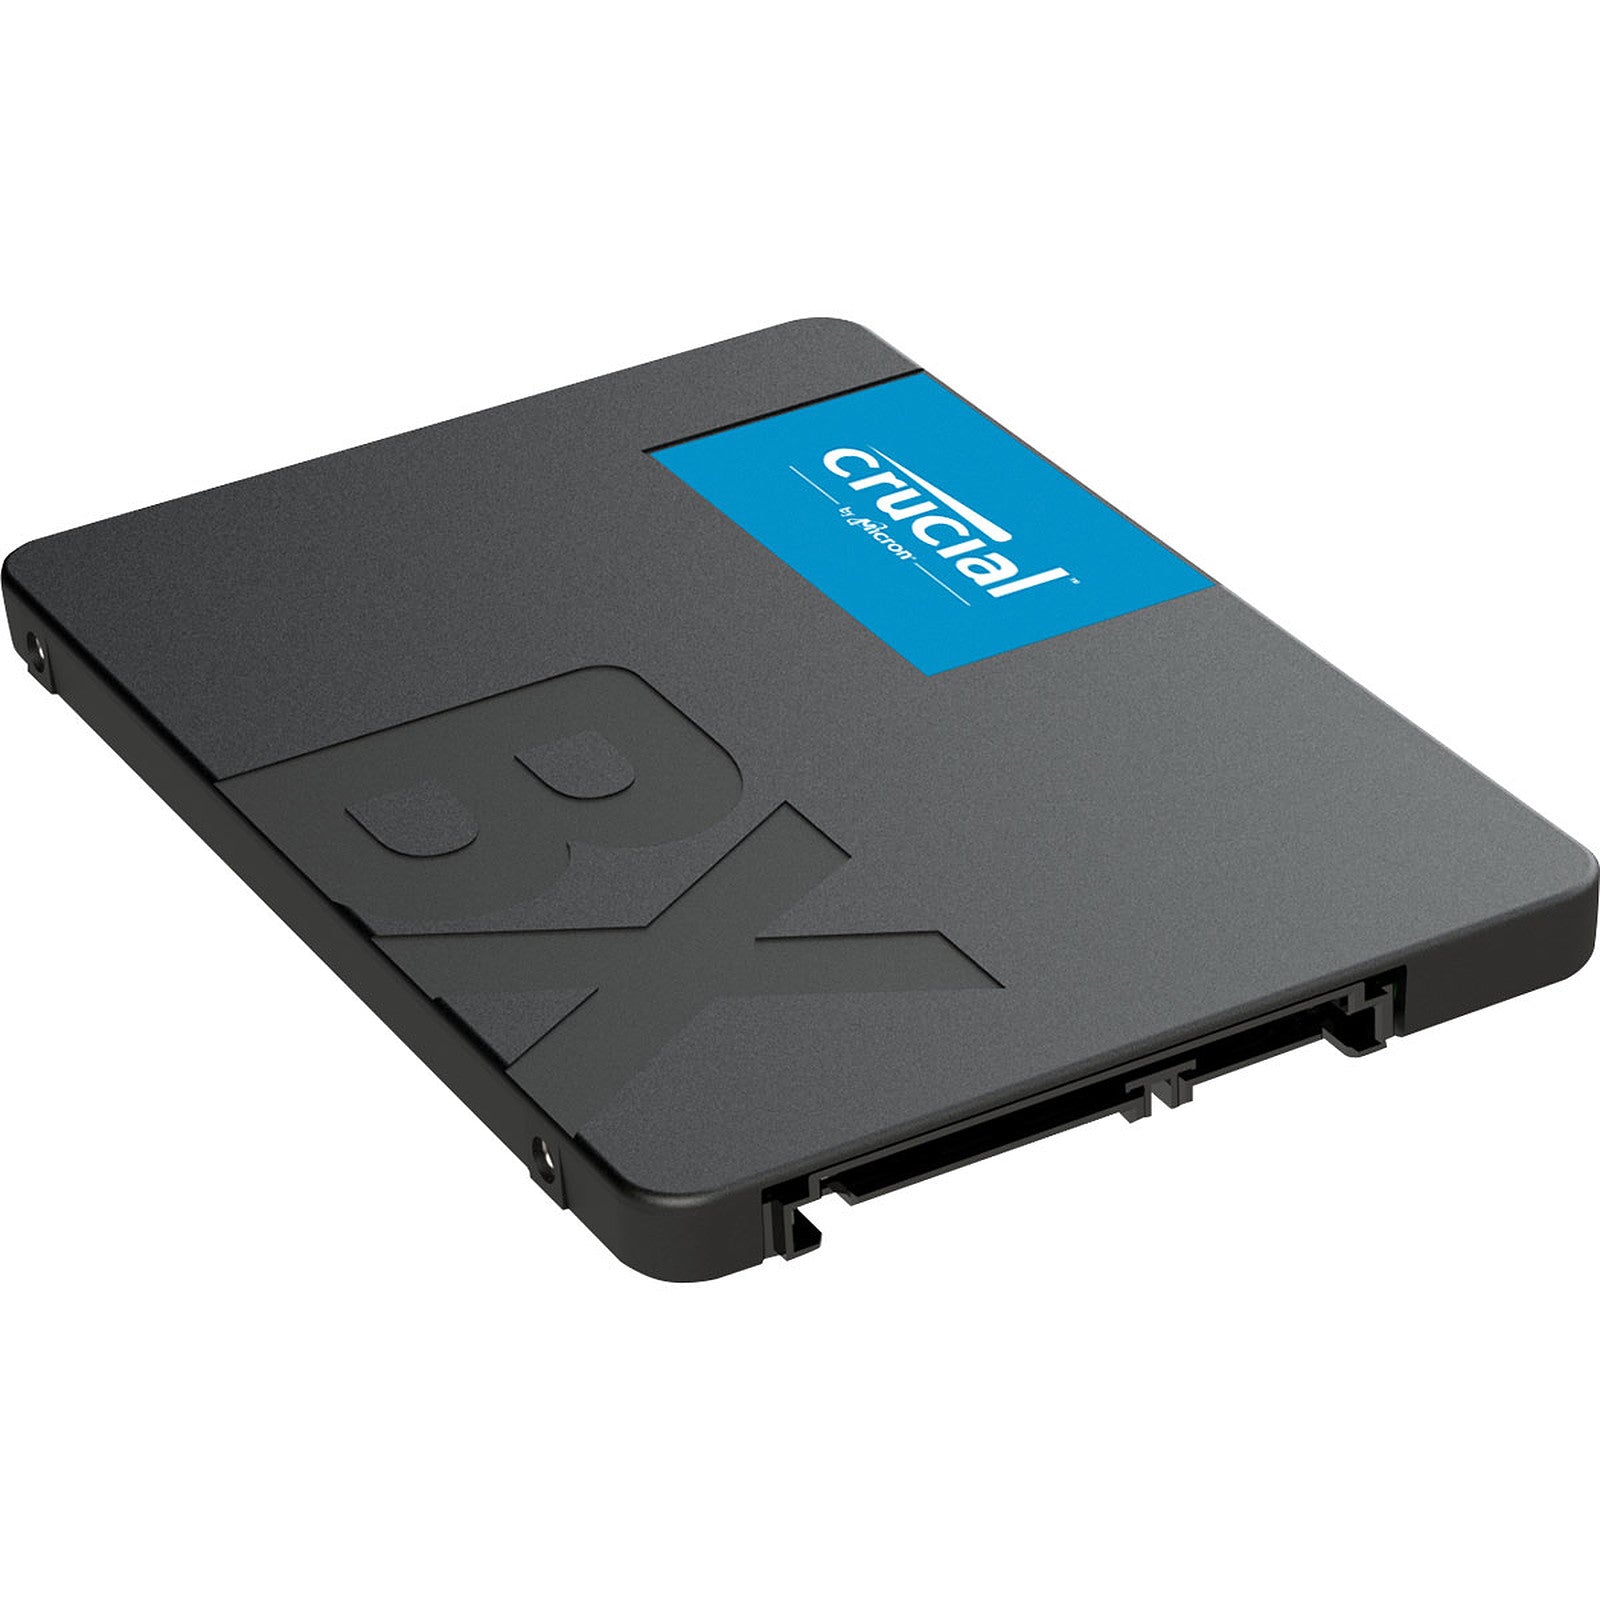 Crucial - Disque SSD - BX500 2.5" SATA 3D NAND (240Go / 500Go / 1To / 2To)